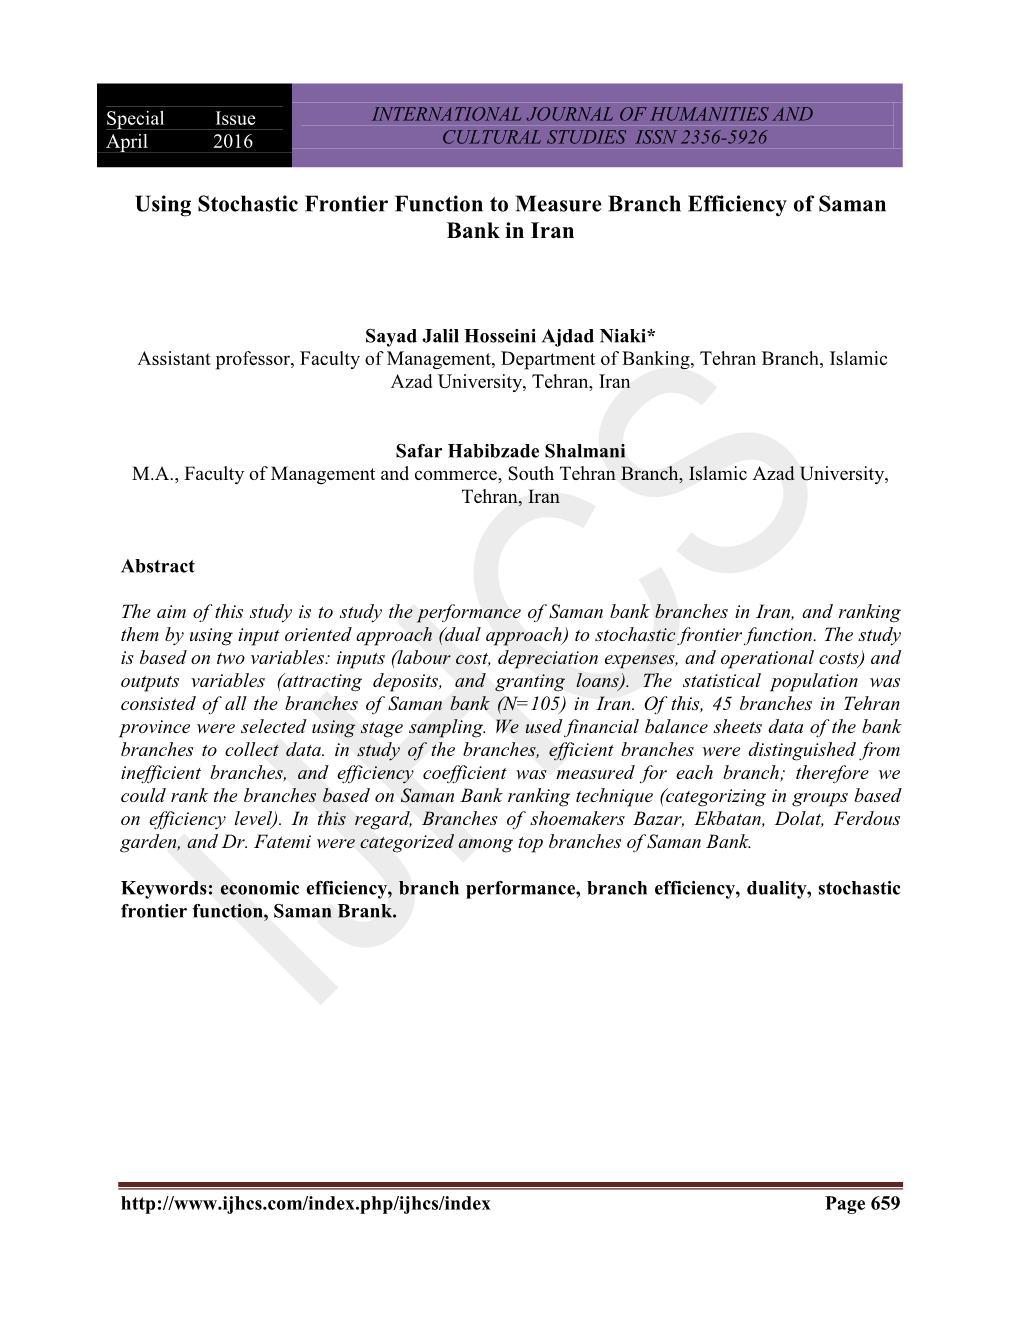 Using Stochastic Frontier Function to Measure Branch Efficiency of Saman Bank in Iran